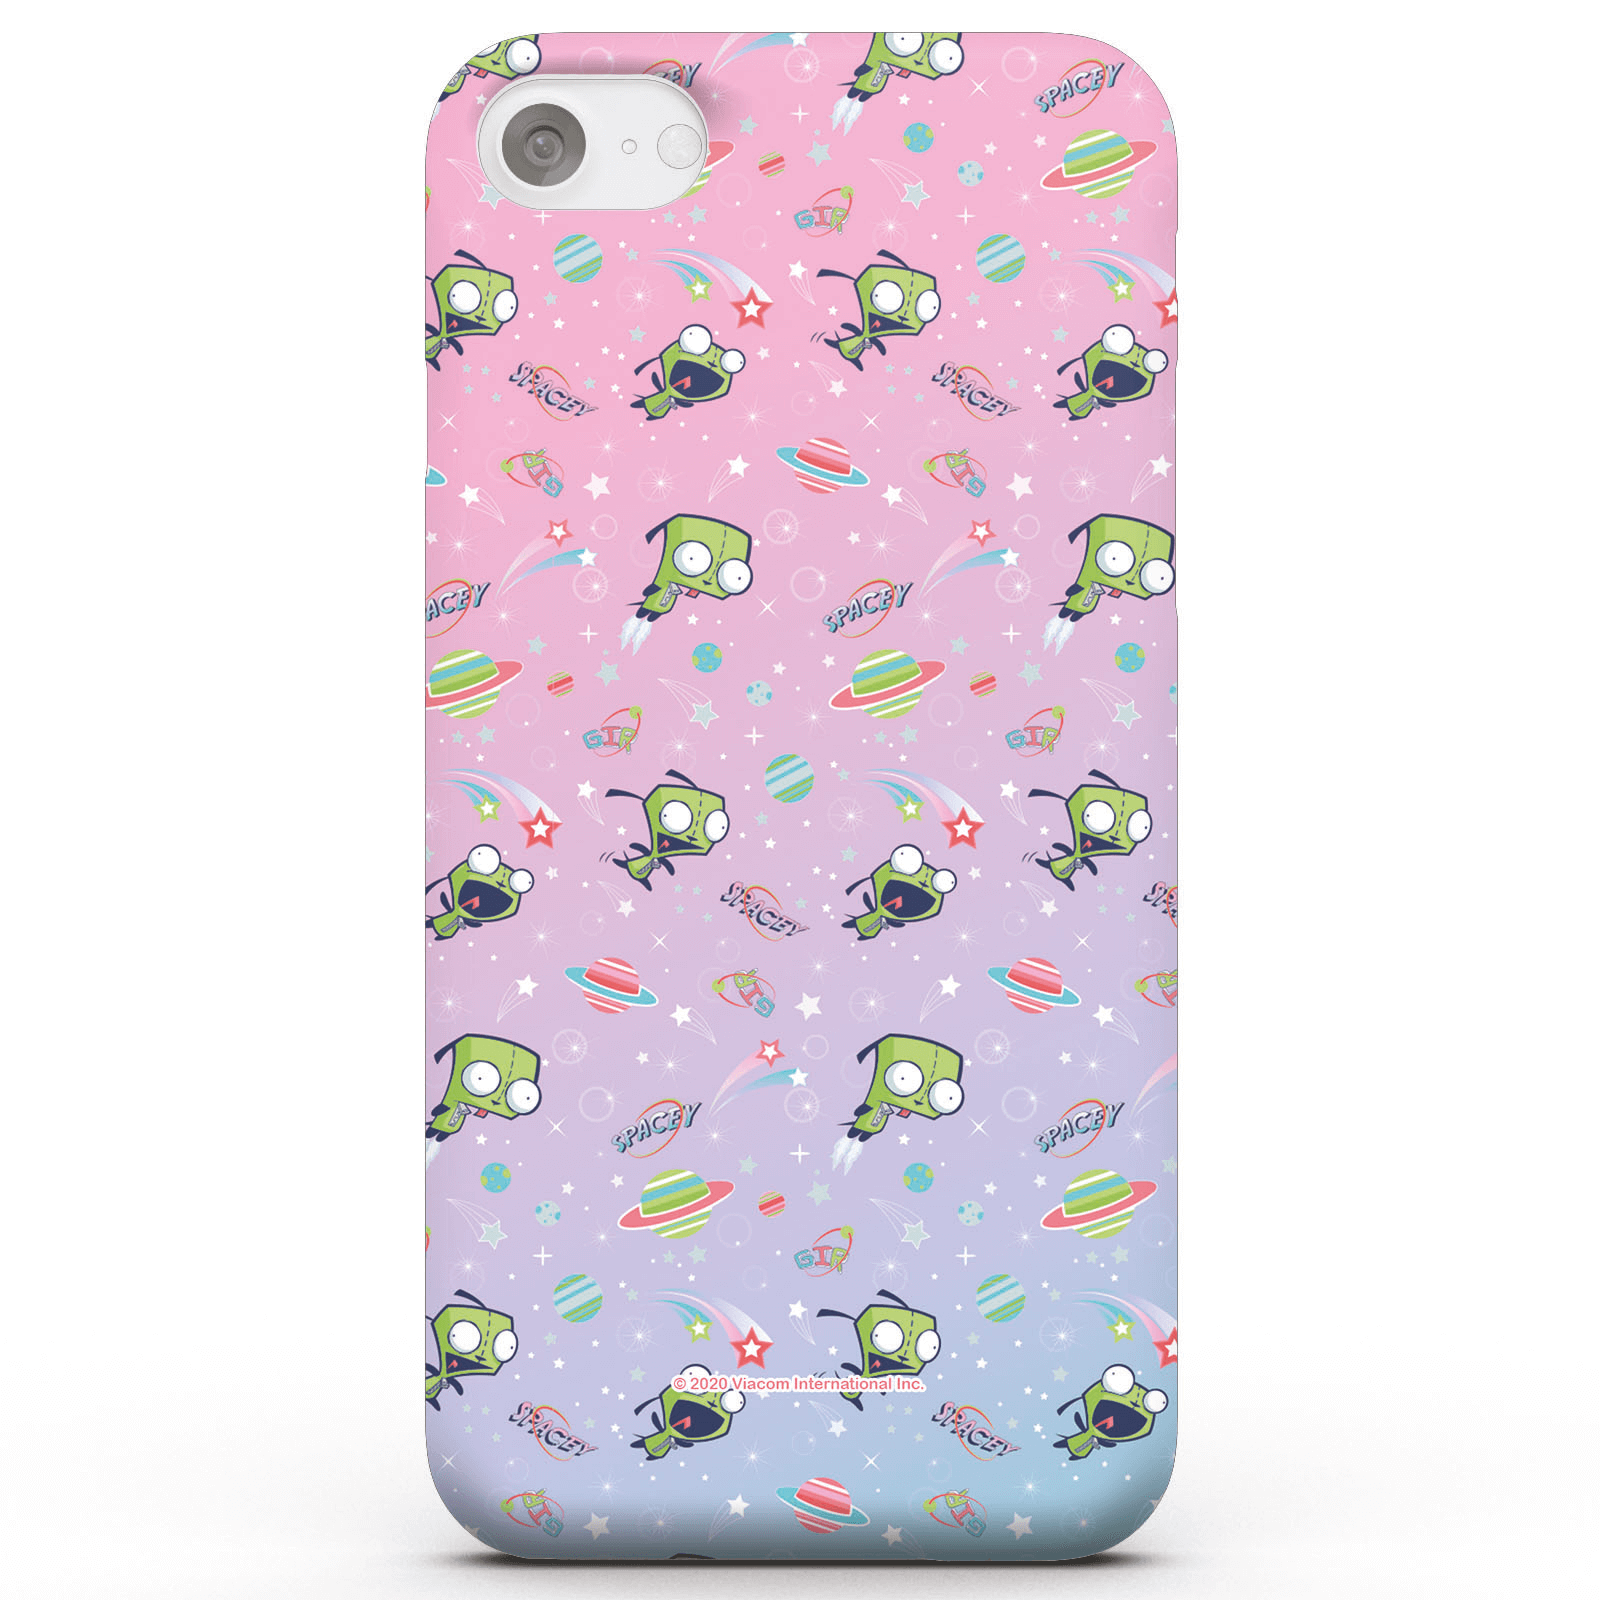 Invader Zim GIR In Space Phone Case for iPhone and Android - iPhone 5C - Snap Case - Matte